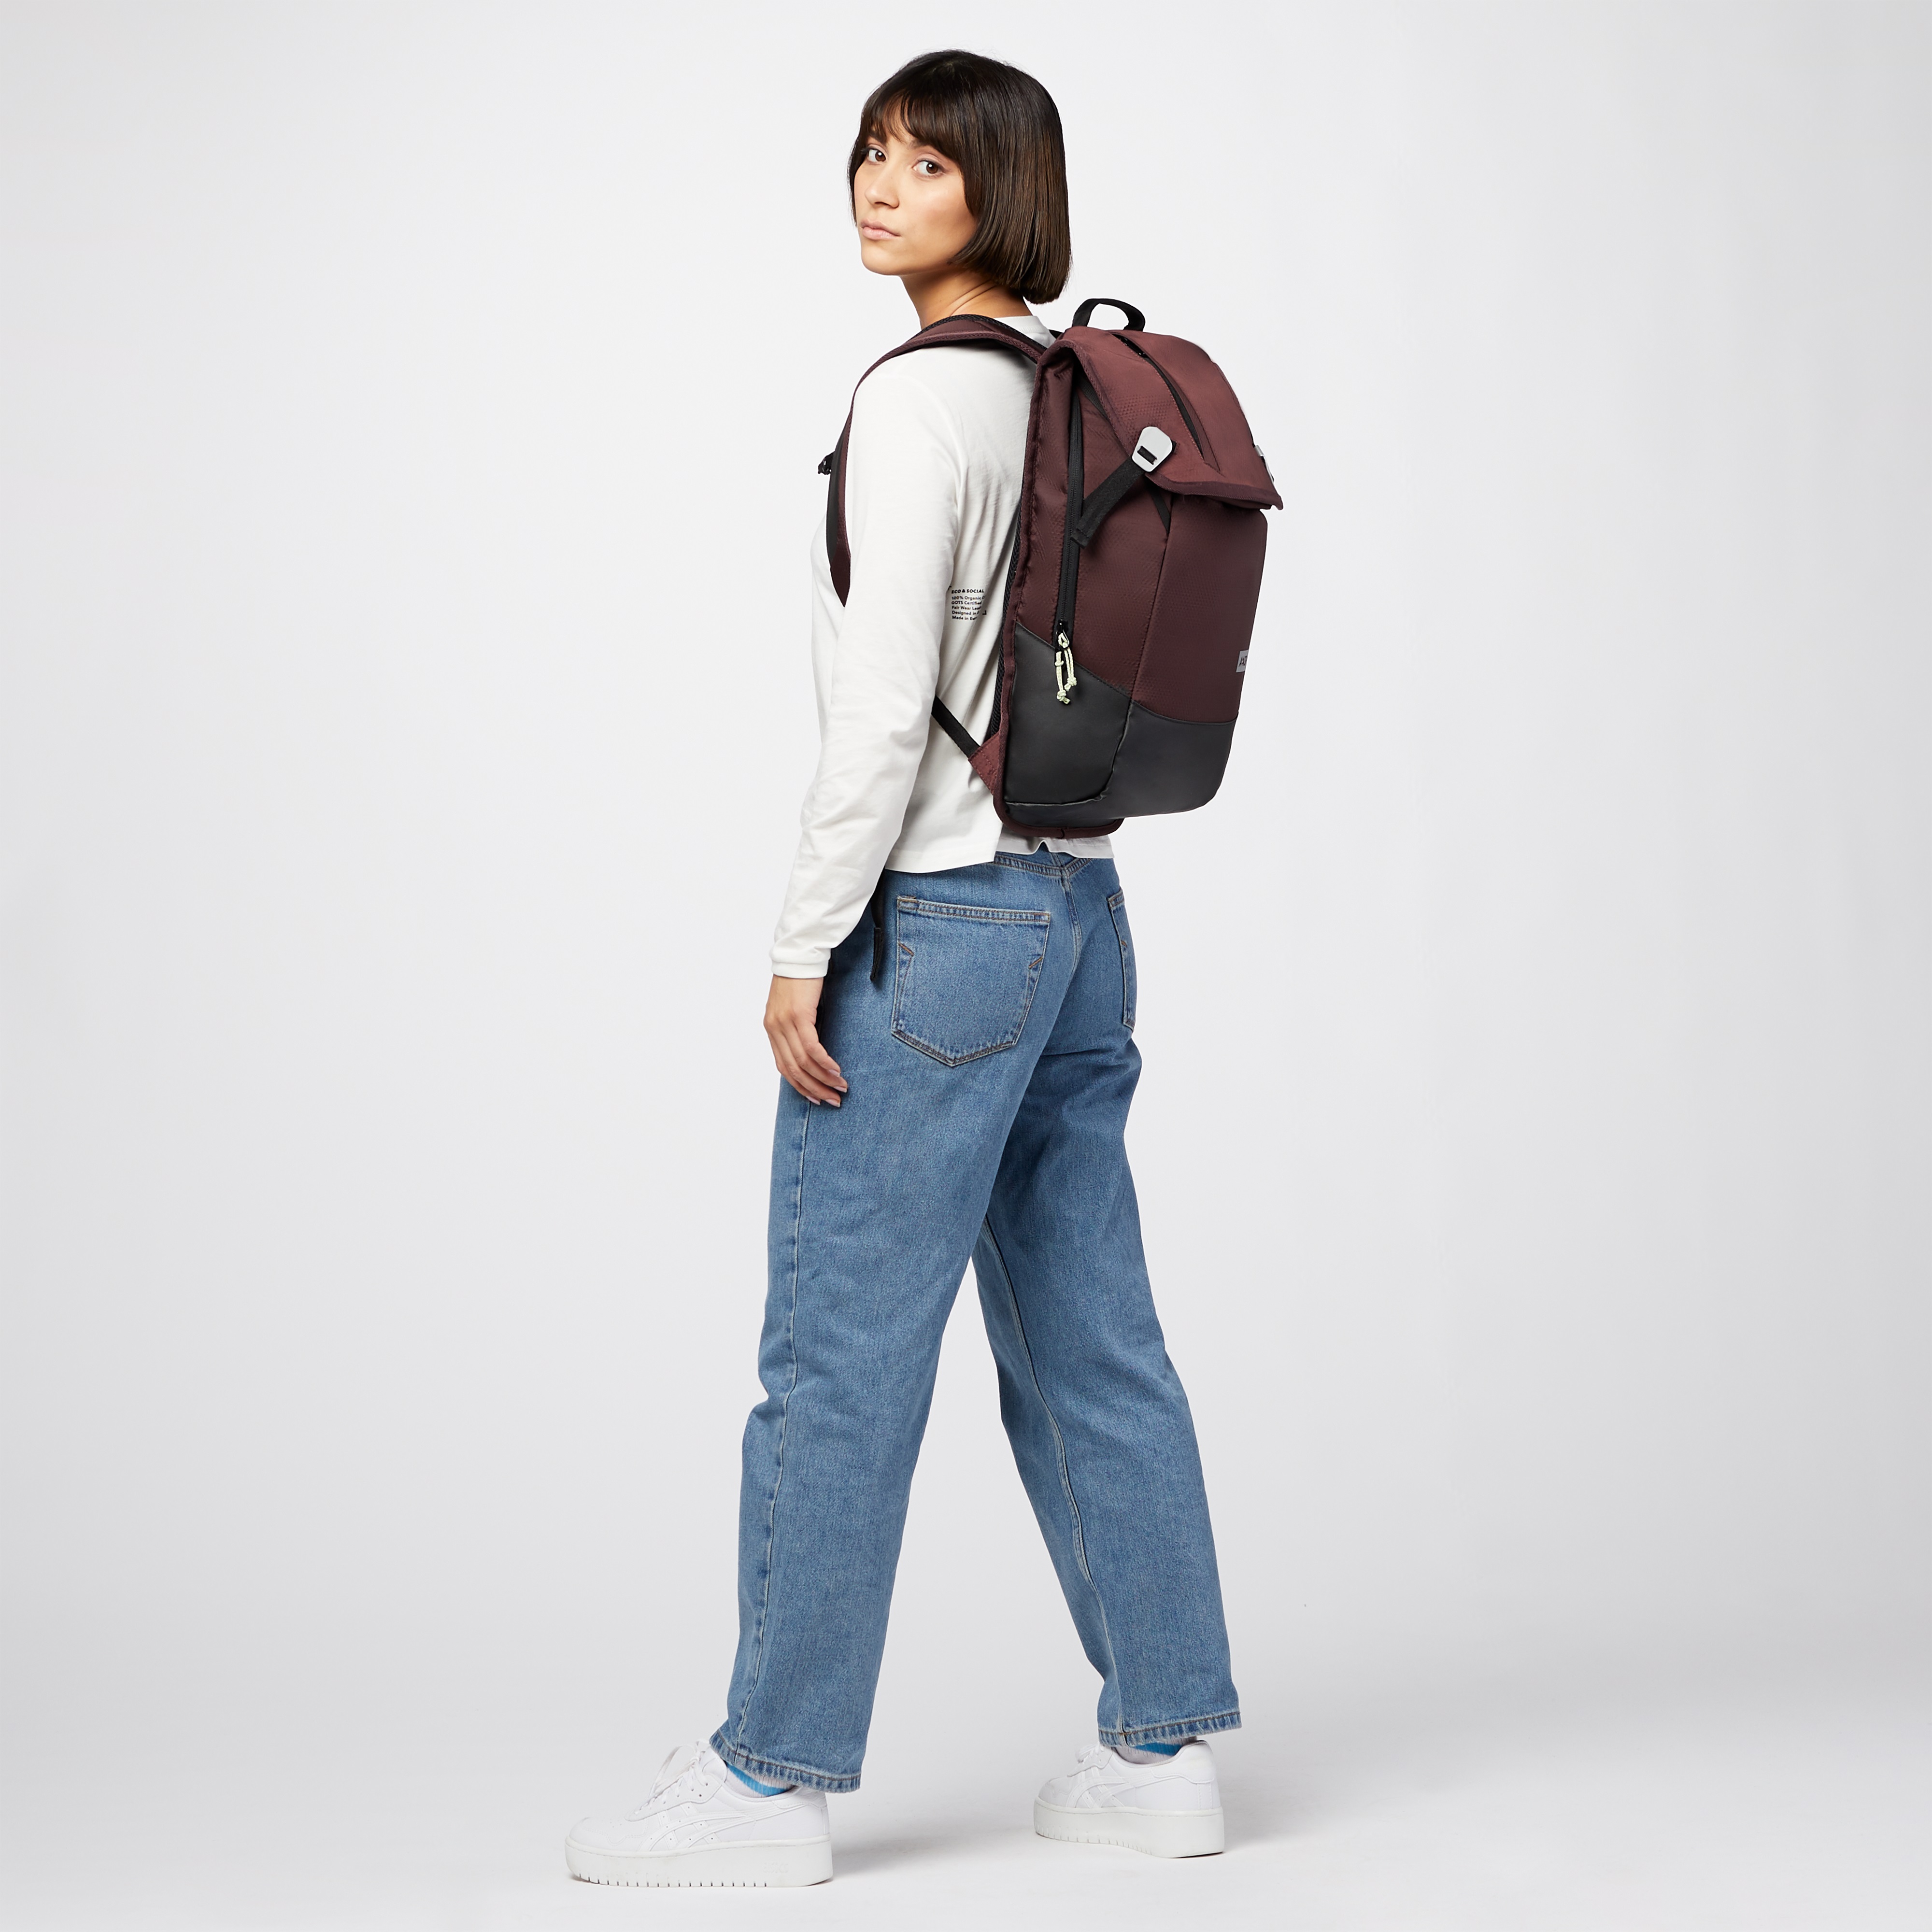 Aevor - DAY PACK - Proof Maroon